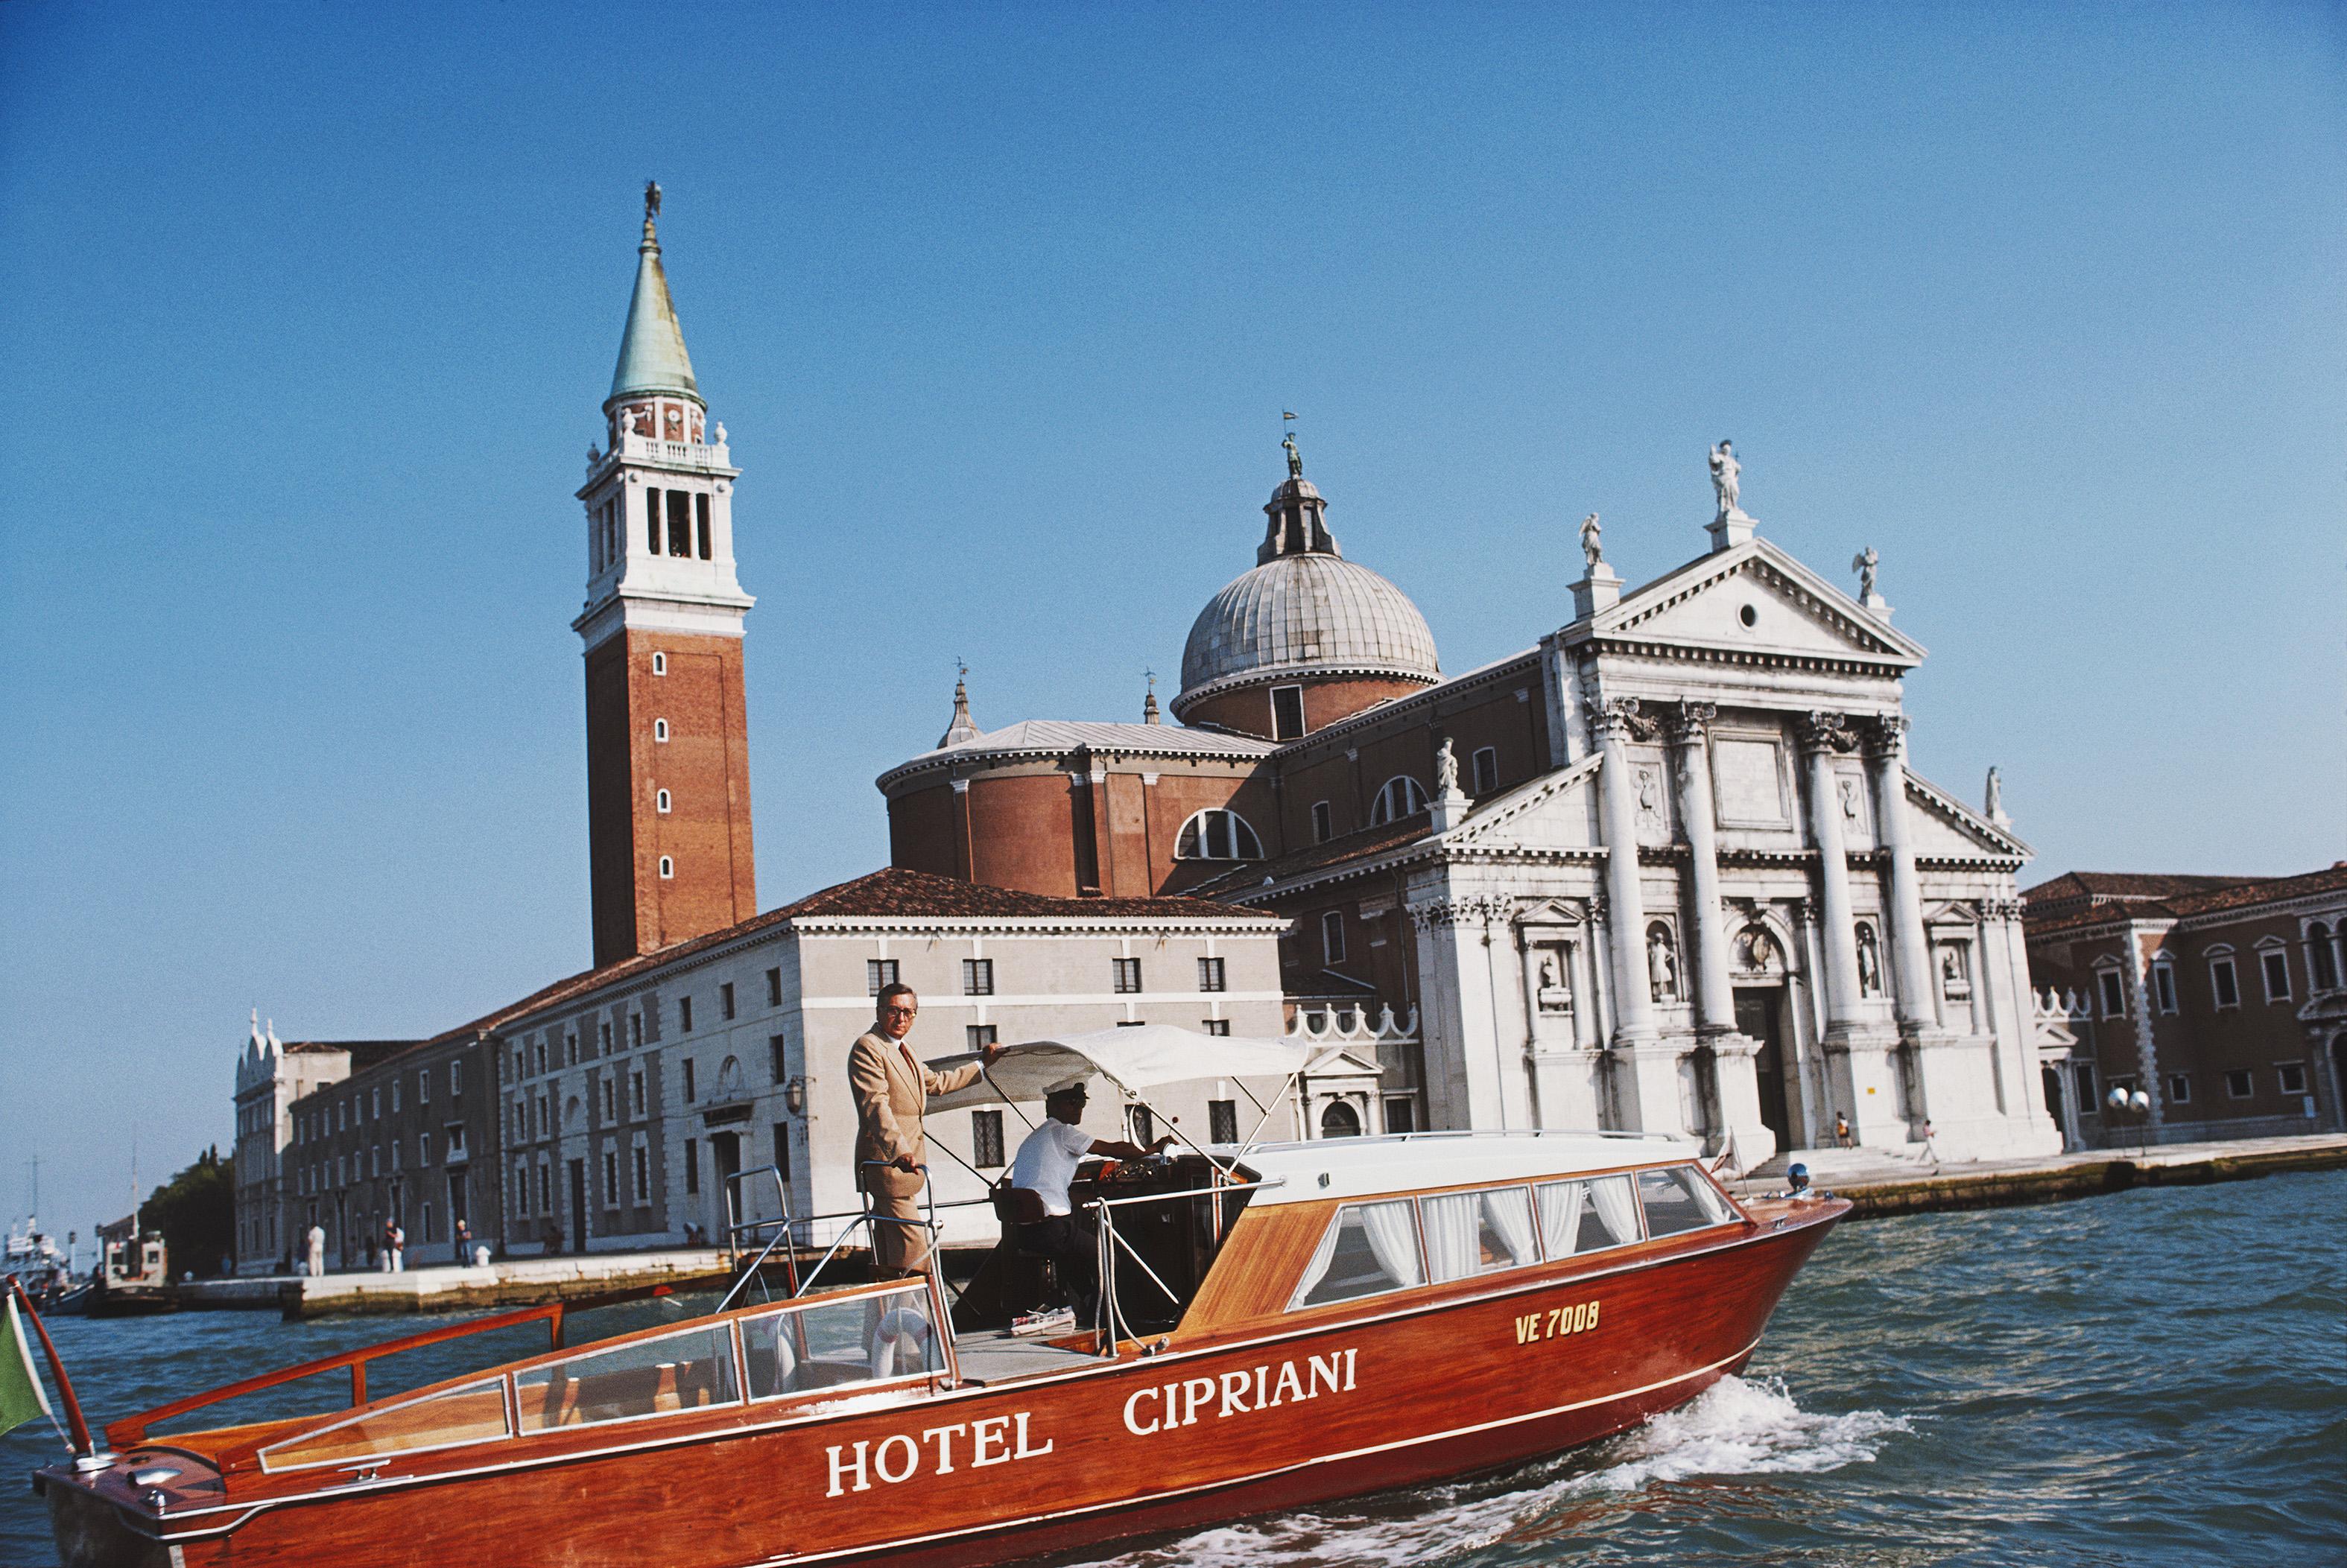 Slim Aarons
Natale Rusconi in Venice
1978 (printed later)
C print 
Signature stamped and numbered edition of 150 
with certificate of authenticity from the Slim Aarons estate 

Natale Rusconi riding a Hotel Cipriani motor launch with the Church of